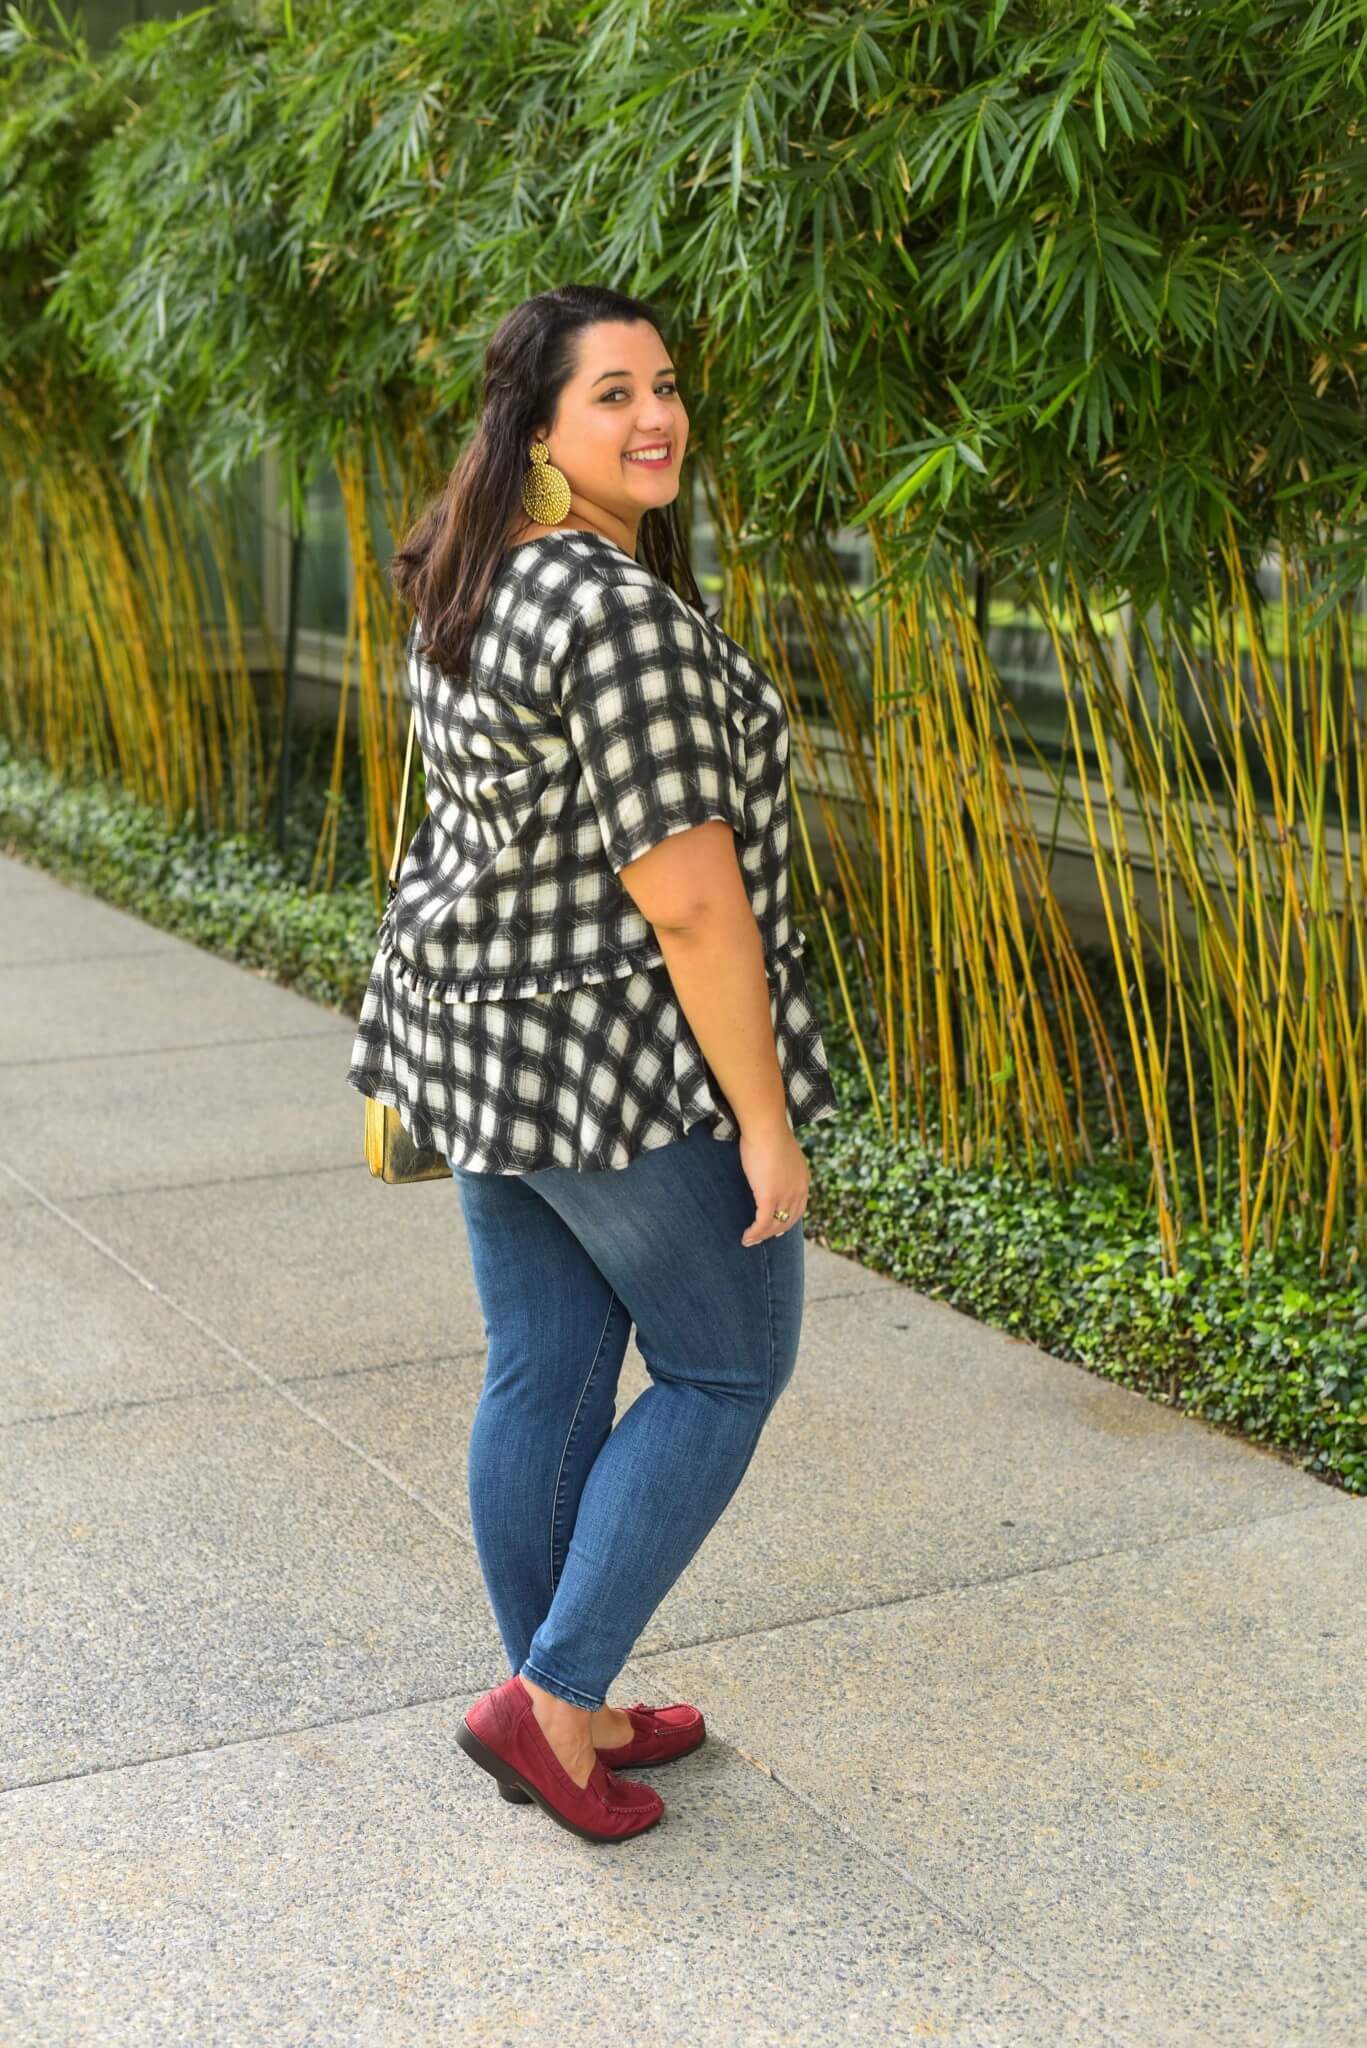 Wit & Wisom jeans are perfect for any summer or fall plus size look